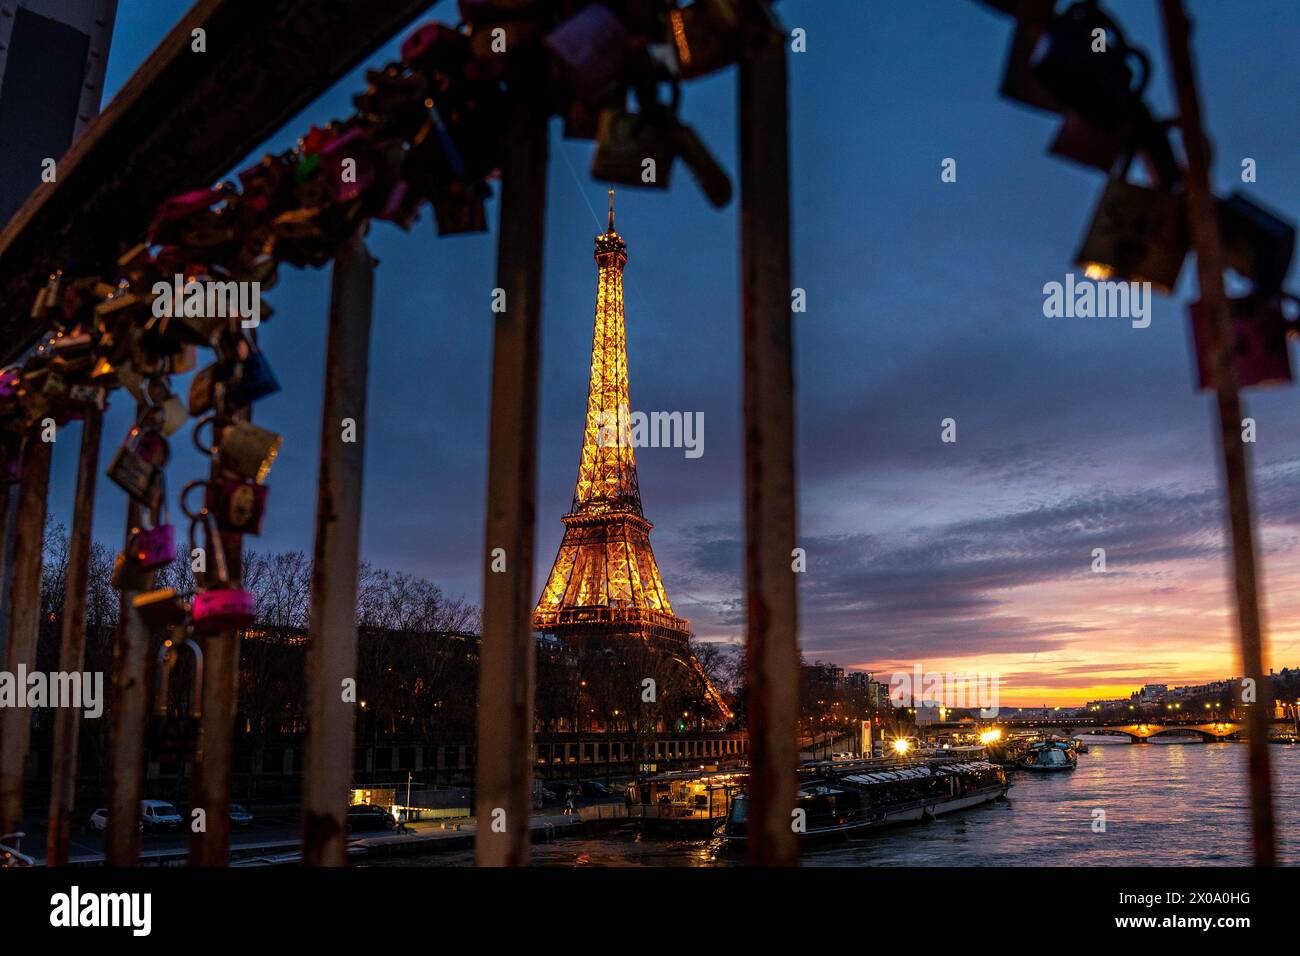 The Eiffel Tower seen between the metal bars of a fence filled with love locks shines against the night sky, casting a warm glow on the Parisian city. Stock Photo